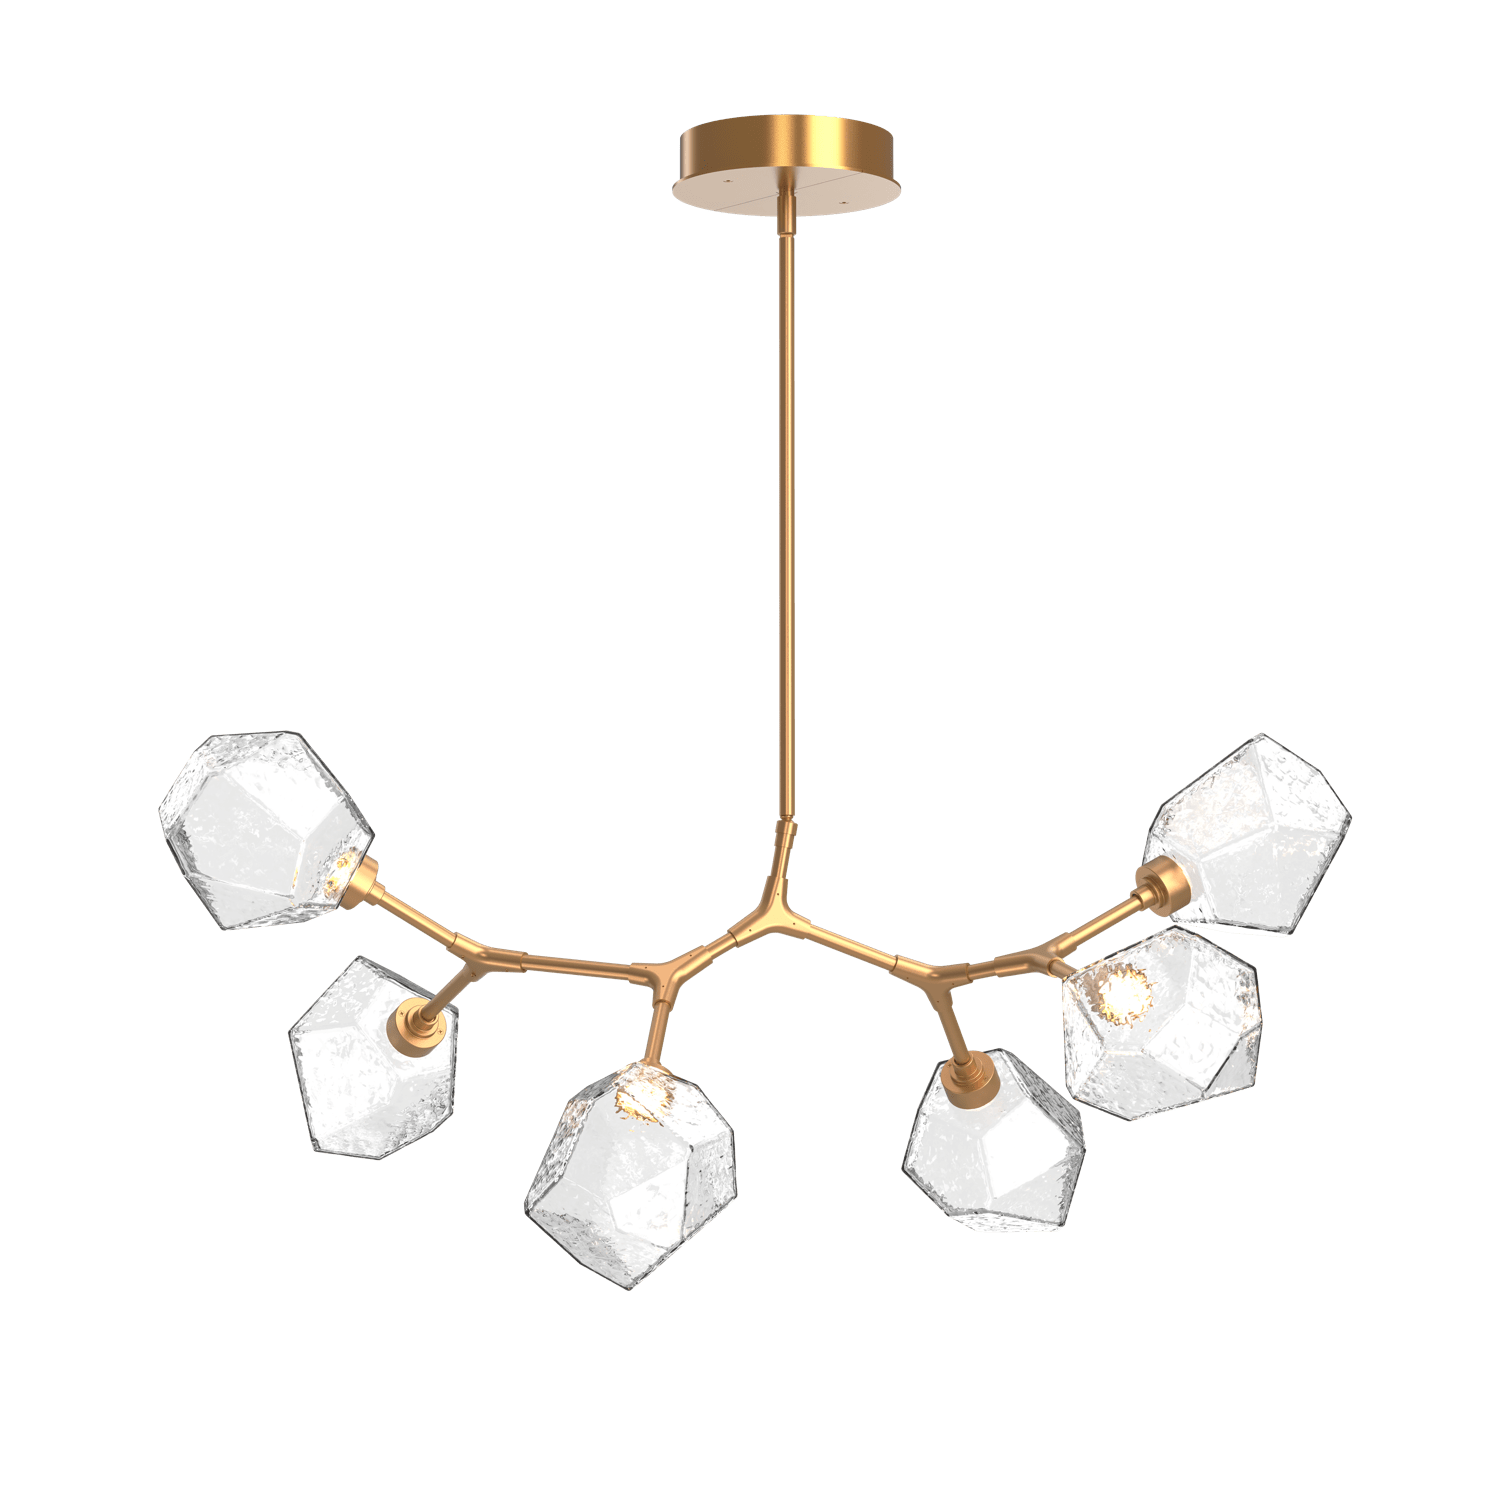 PLB0039-BA-NB-C-Hammerton-Studio-Gem-6-light-modern-branch-chandelier-with-novel-brass-finish-and-clear-blown-glass-shades-and-LED-lamping